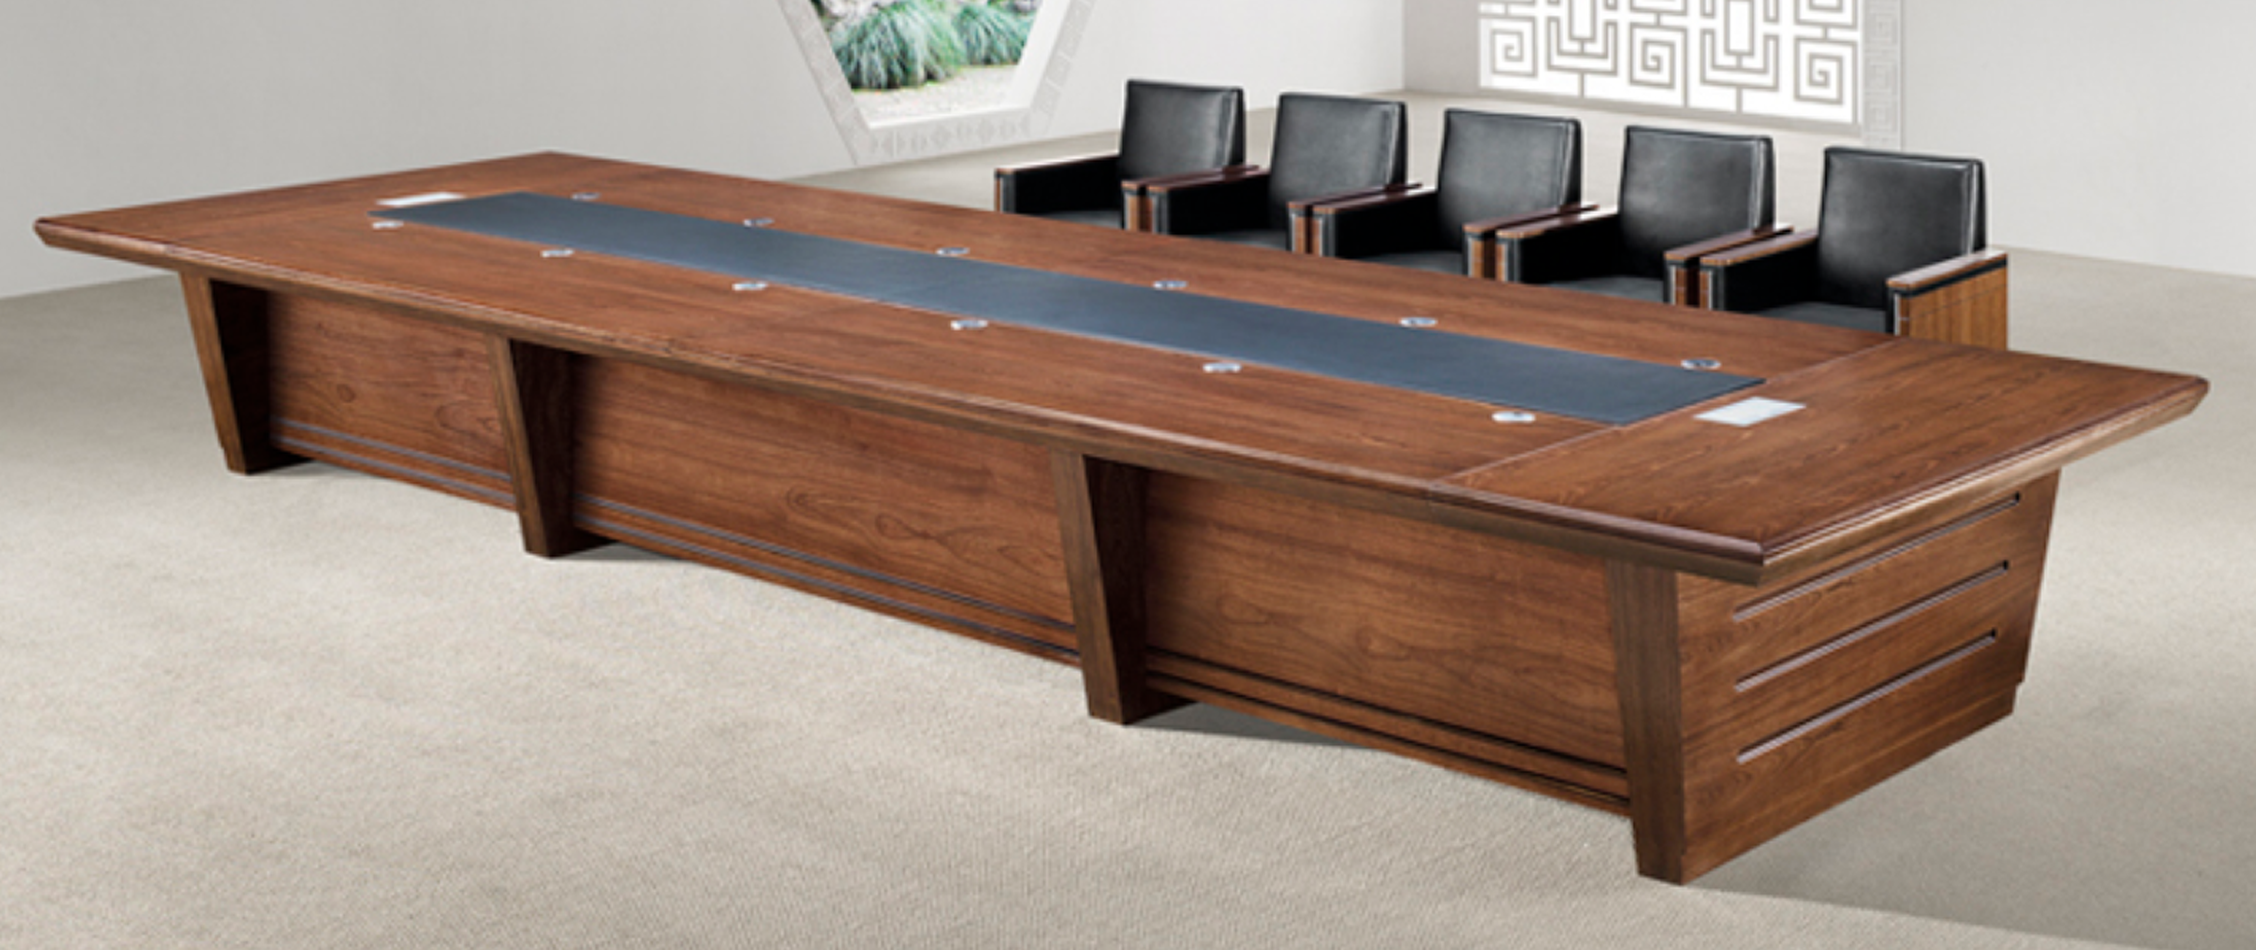 Heavy Duty Executive Boardroom Table - 4800mm / 5000mm / 5200mm / 5400mm / 5600mm / 5800mm / 6000mm - KT5C48 Near Me